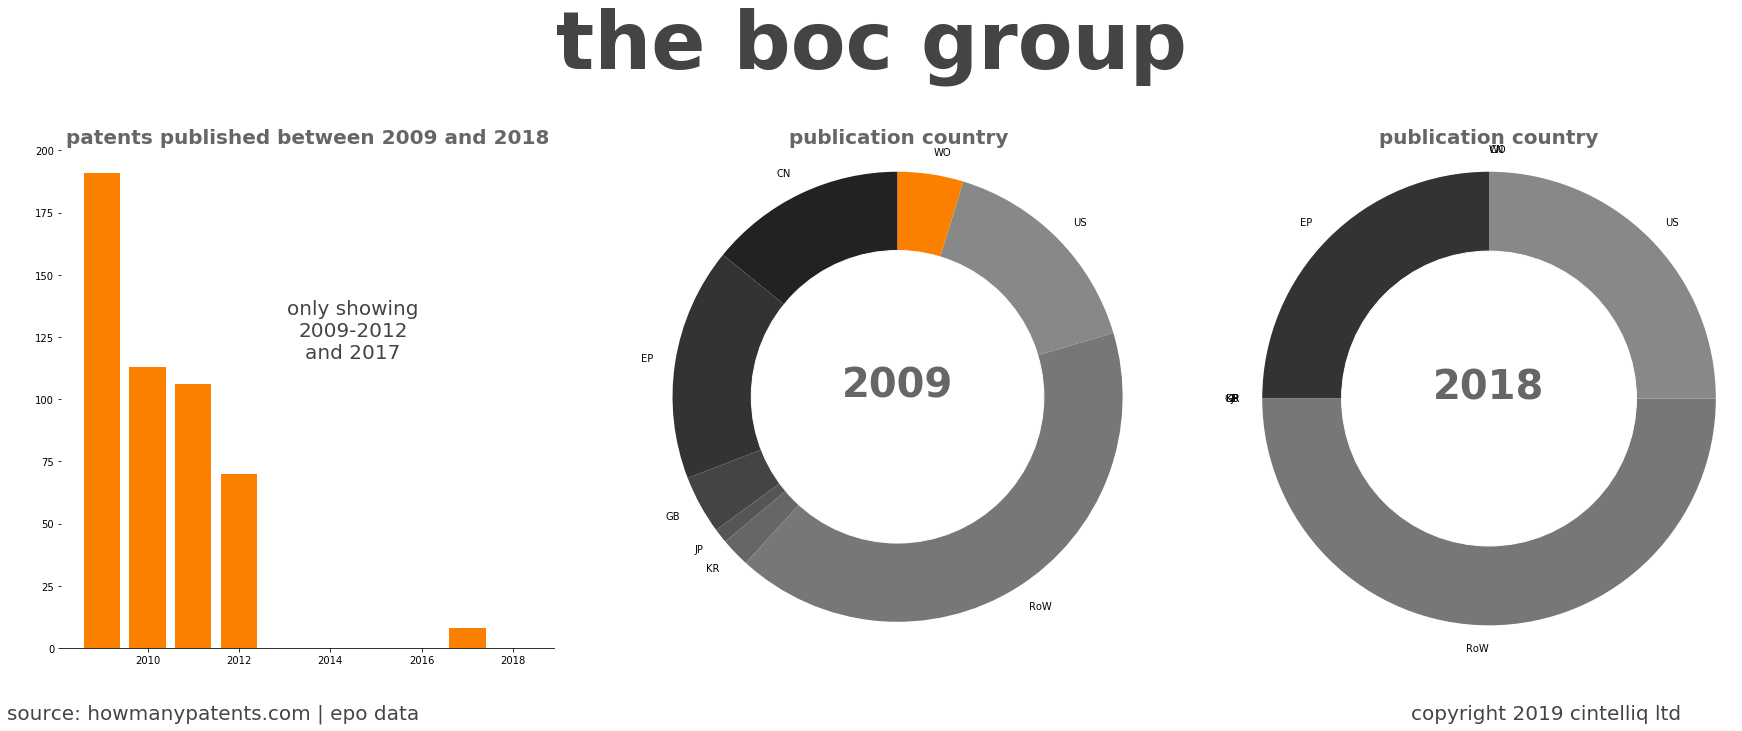 summary of patents for The Boc Group